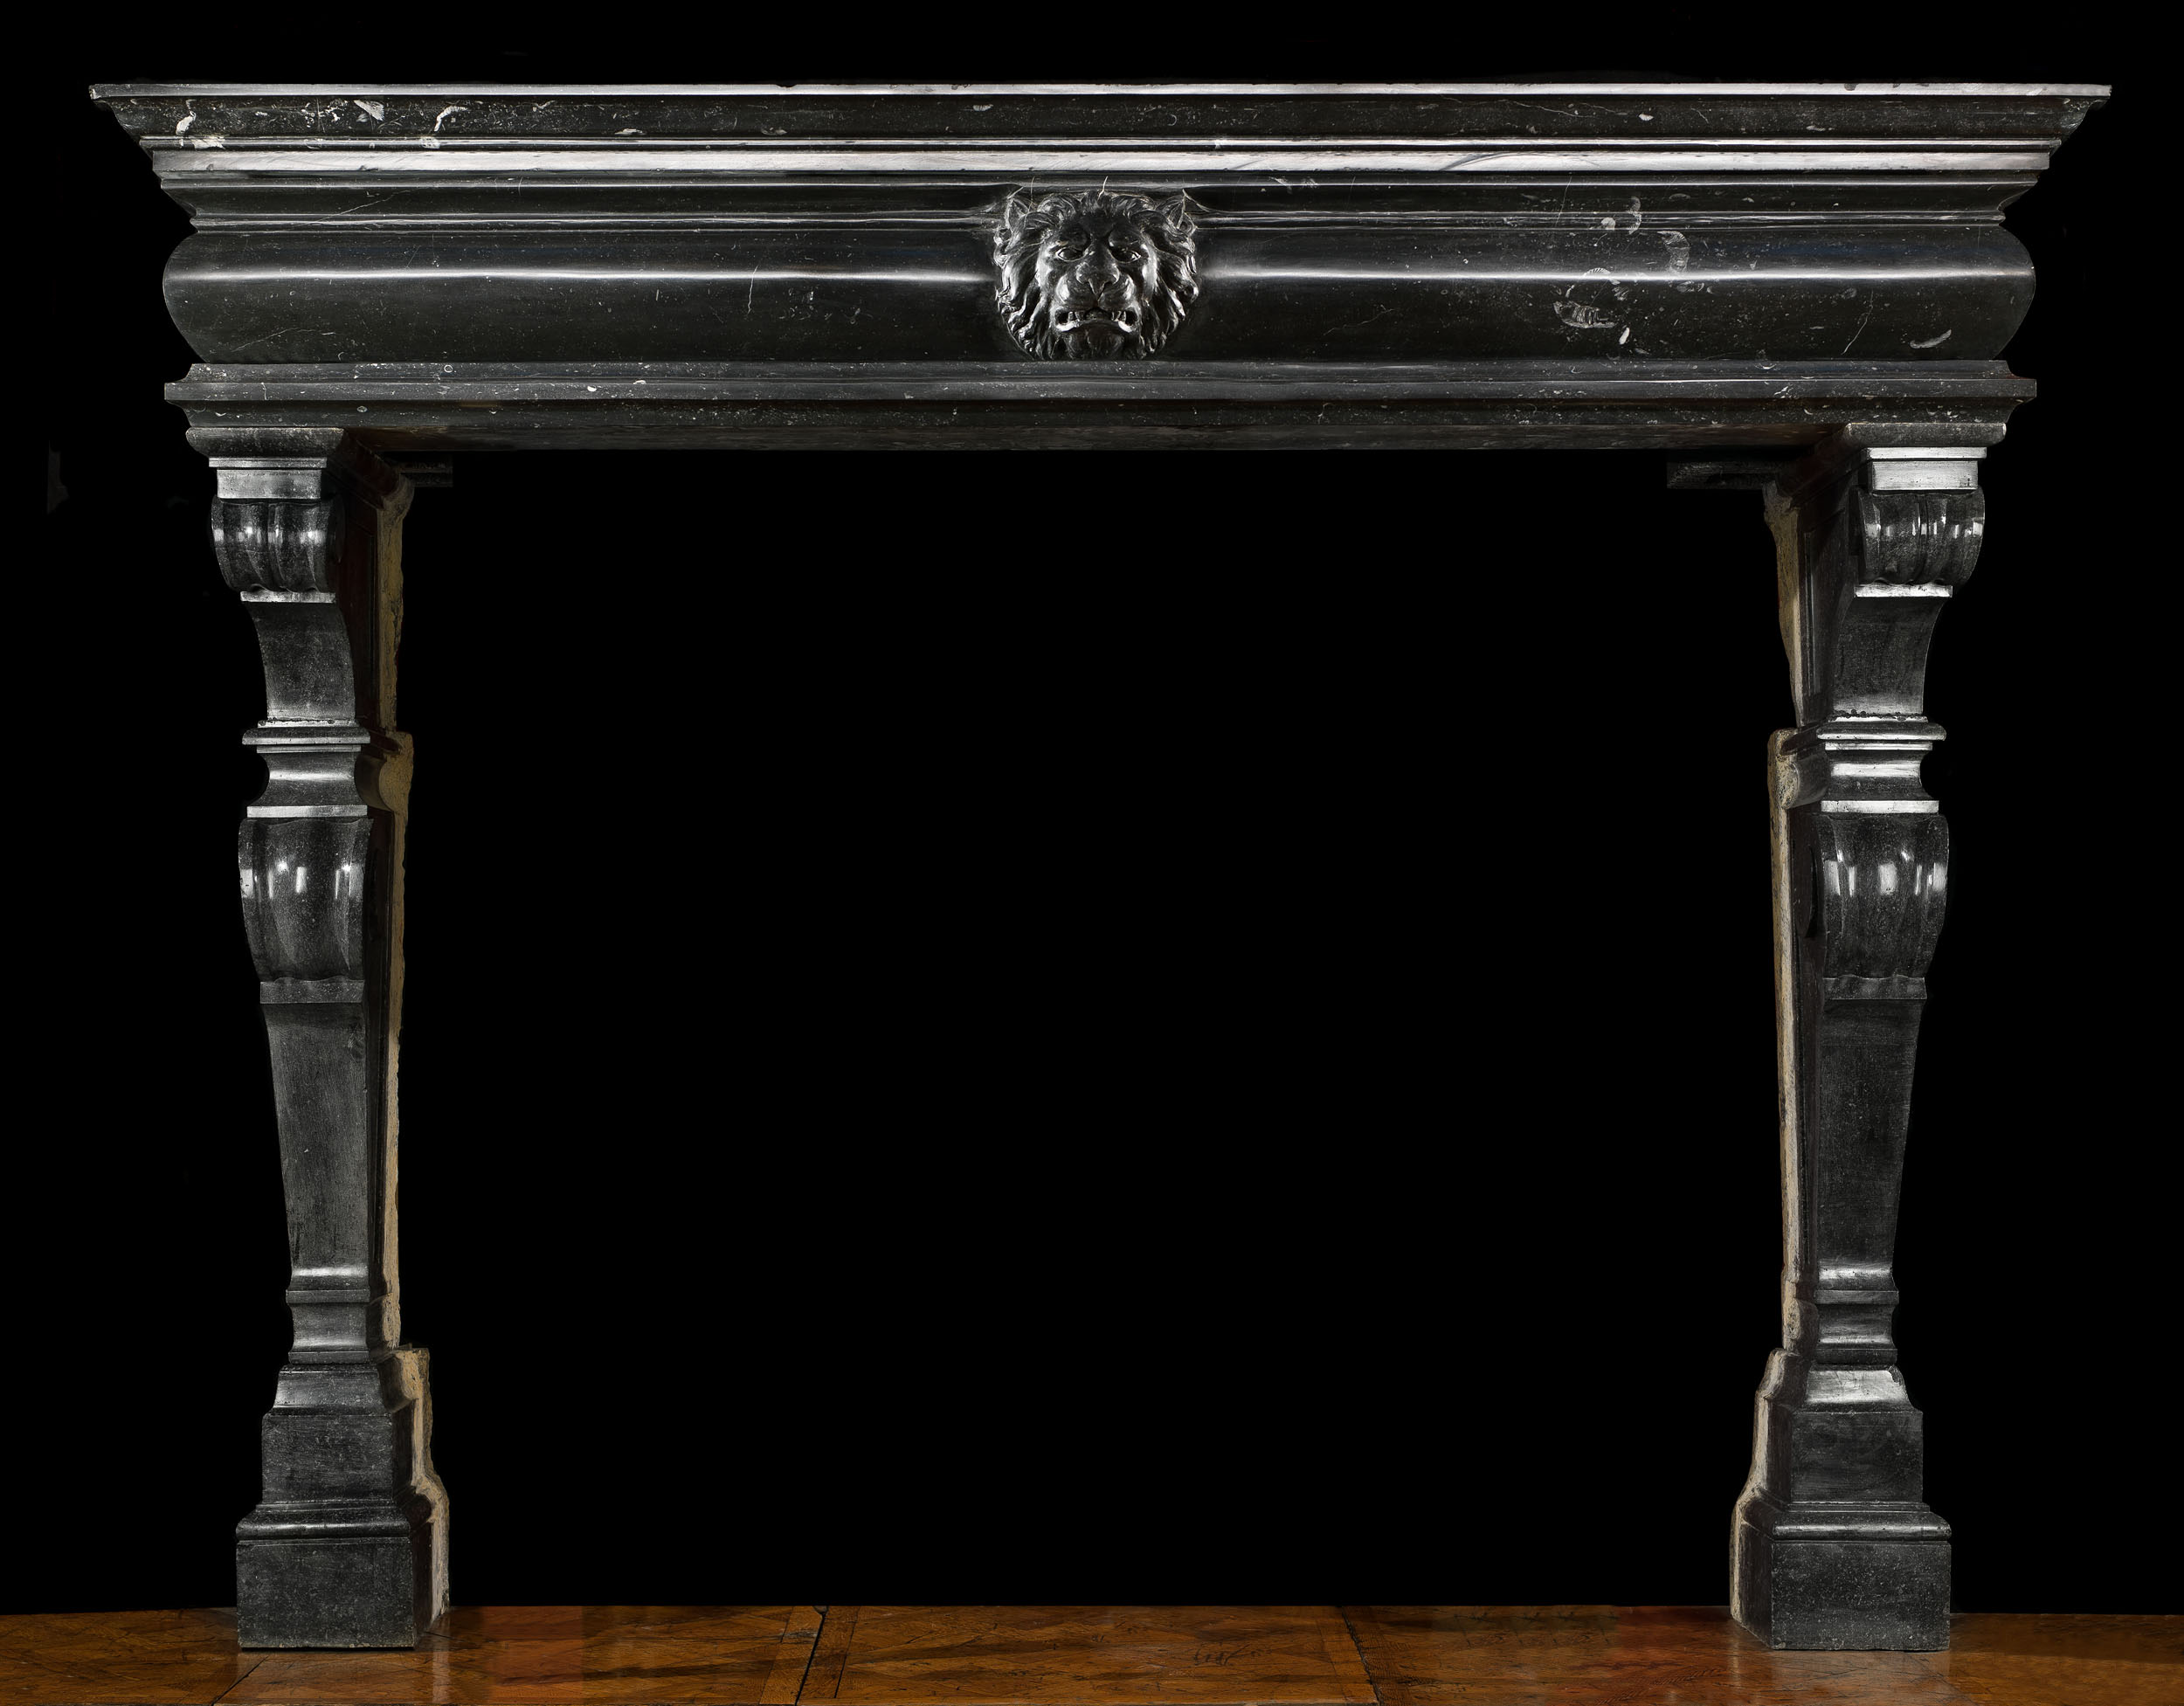 Baroque Fossil Stone Fireplace Mantel